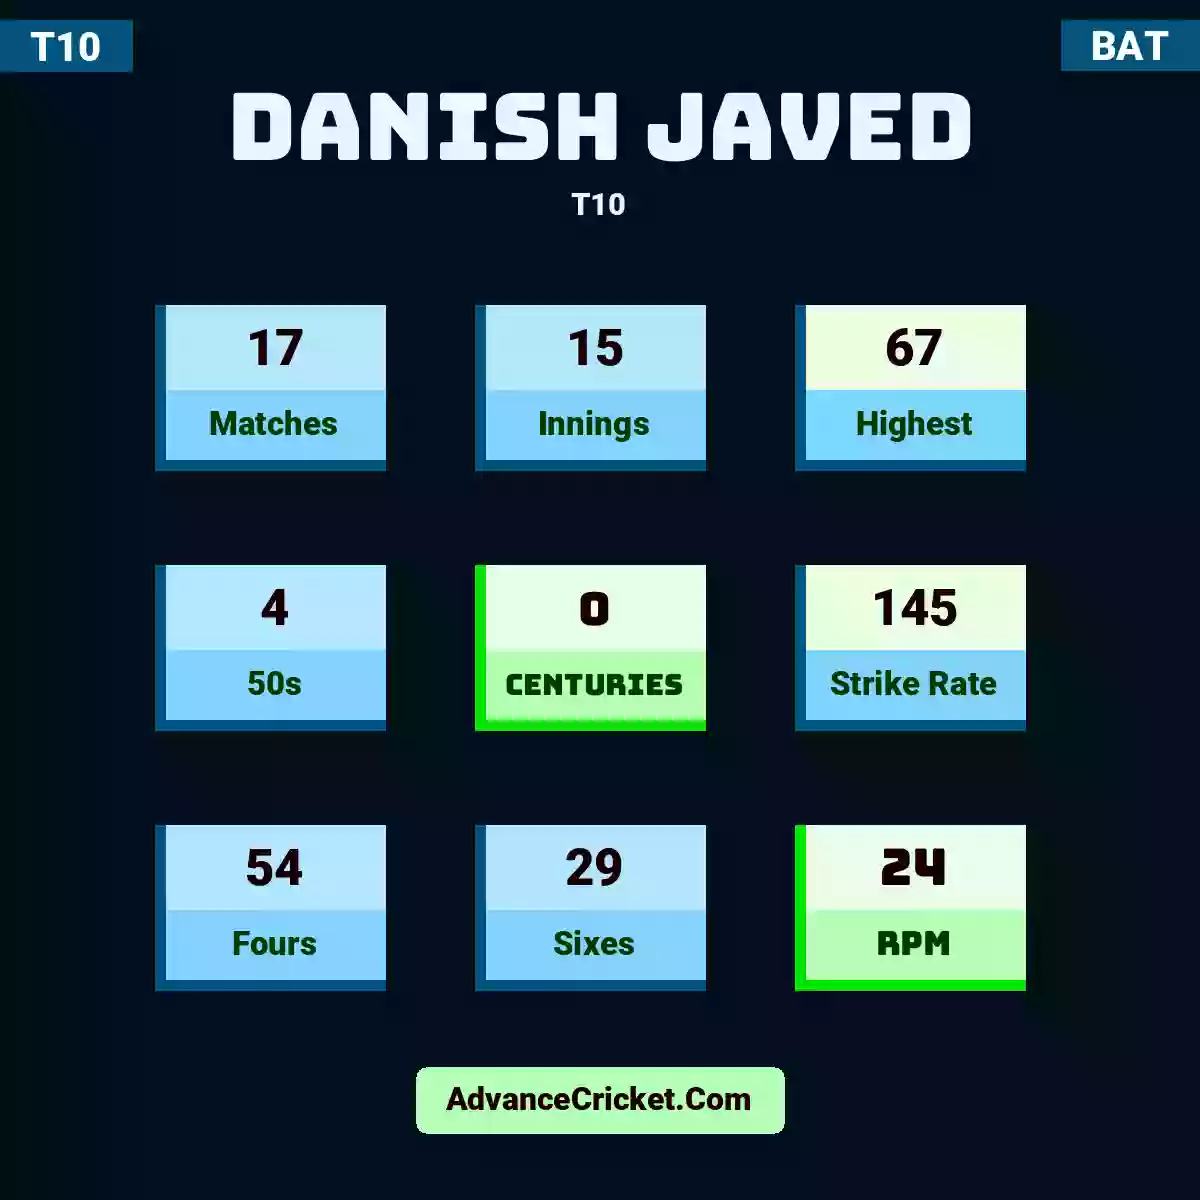 Danish Javed T10 , Danish Javed played 17 matches, scored 67 runs as highest, 4 half-centuries, and 0 centuries, with a strike rate of 145. D.Javed hit 54 fours and 29 sixes, with an RPM of 24.